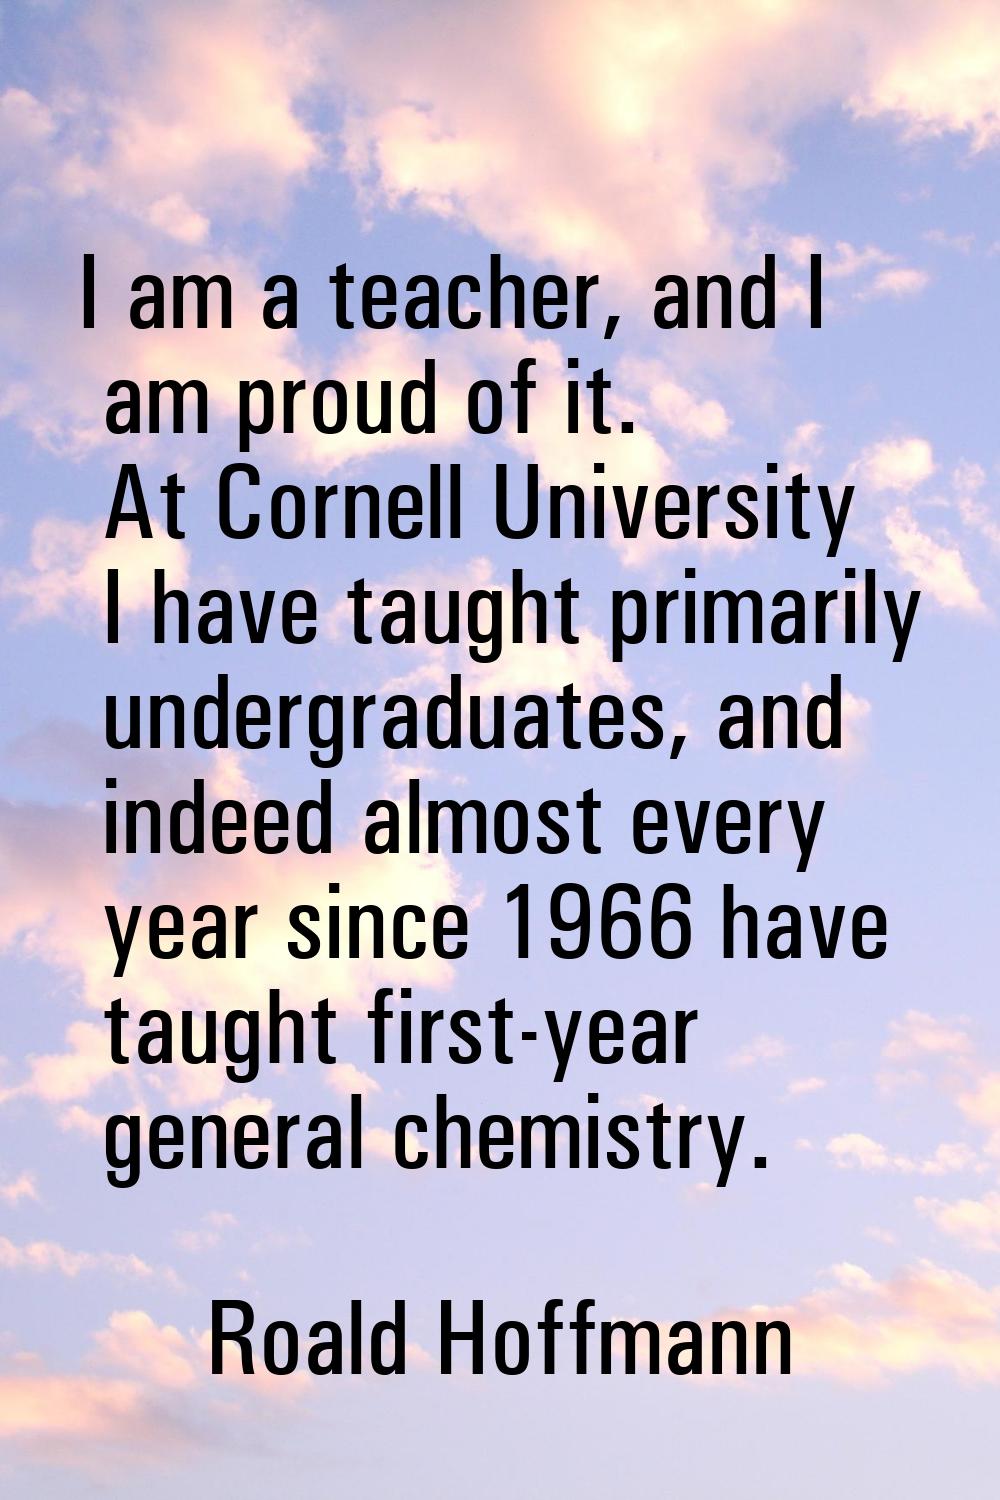 I am a teacher, and I am proud of it. At Cornell University I have taught primarily undergraduates,